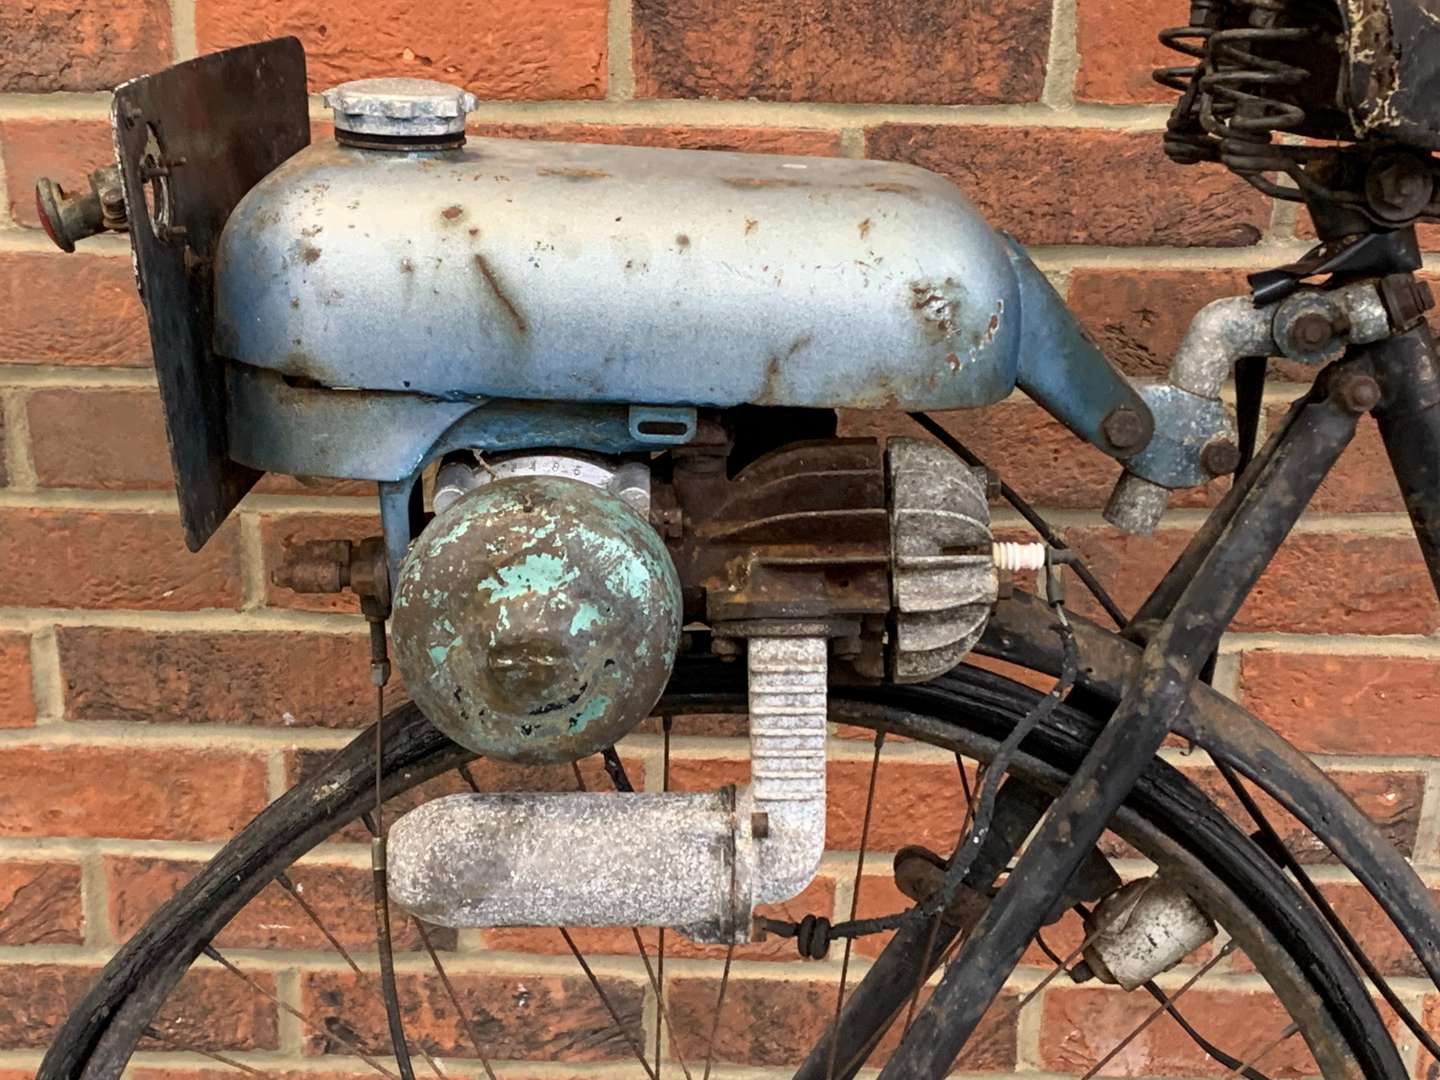 <p>Trojan Mini Motor Attached to a Vintage Bicycle</p>